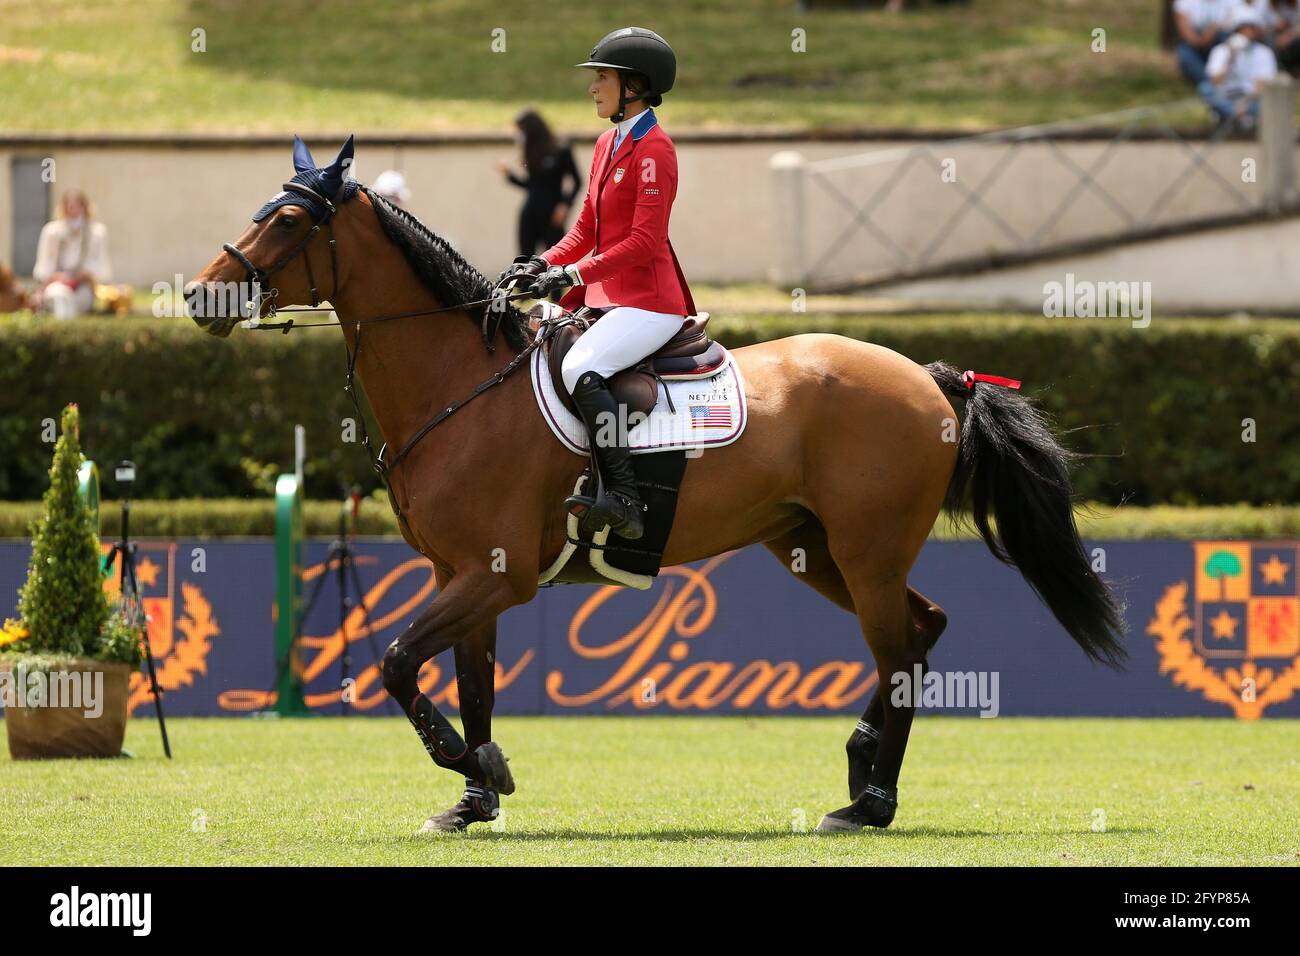 Rome, Italy. 29th May, 2021. Jessica Springsteen (USA) onward Rmf Zecilie during the Small Gran Prix at 88th CSIO 5* Master D'Inzeo at Piazza di Siena on May 19, 2021 in Rome, Italy. Jessica is the daughter of Bruce Springsteen (Photo by Giuseppe Fama/Pacific Press) Credit: Pacific Press Media Production Corp./Alamy Live News Stock Photo